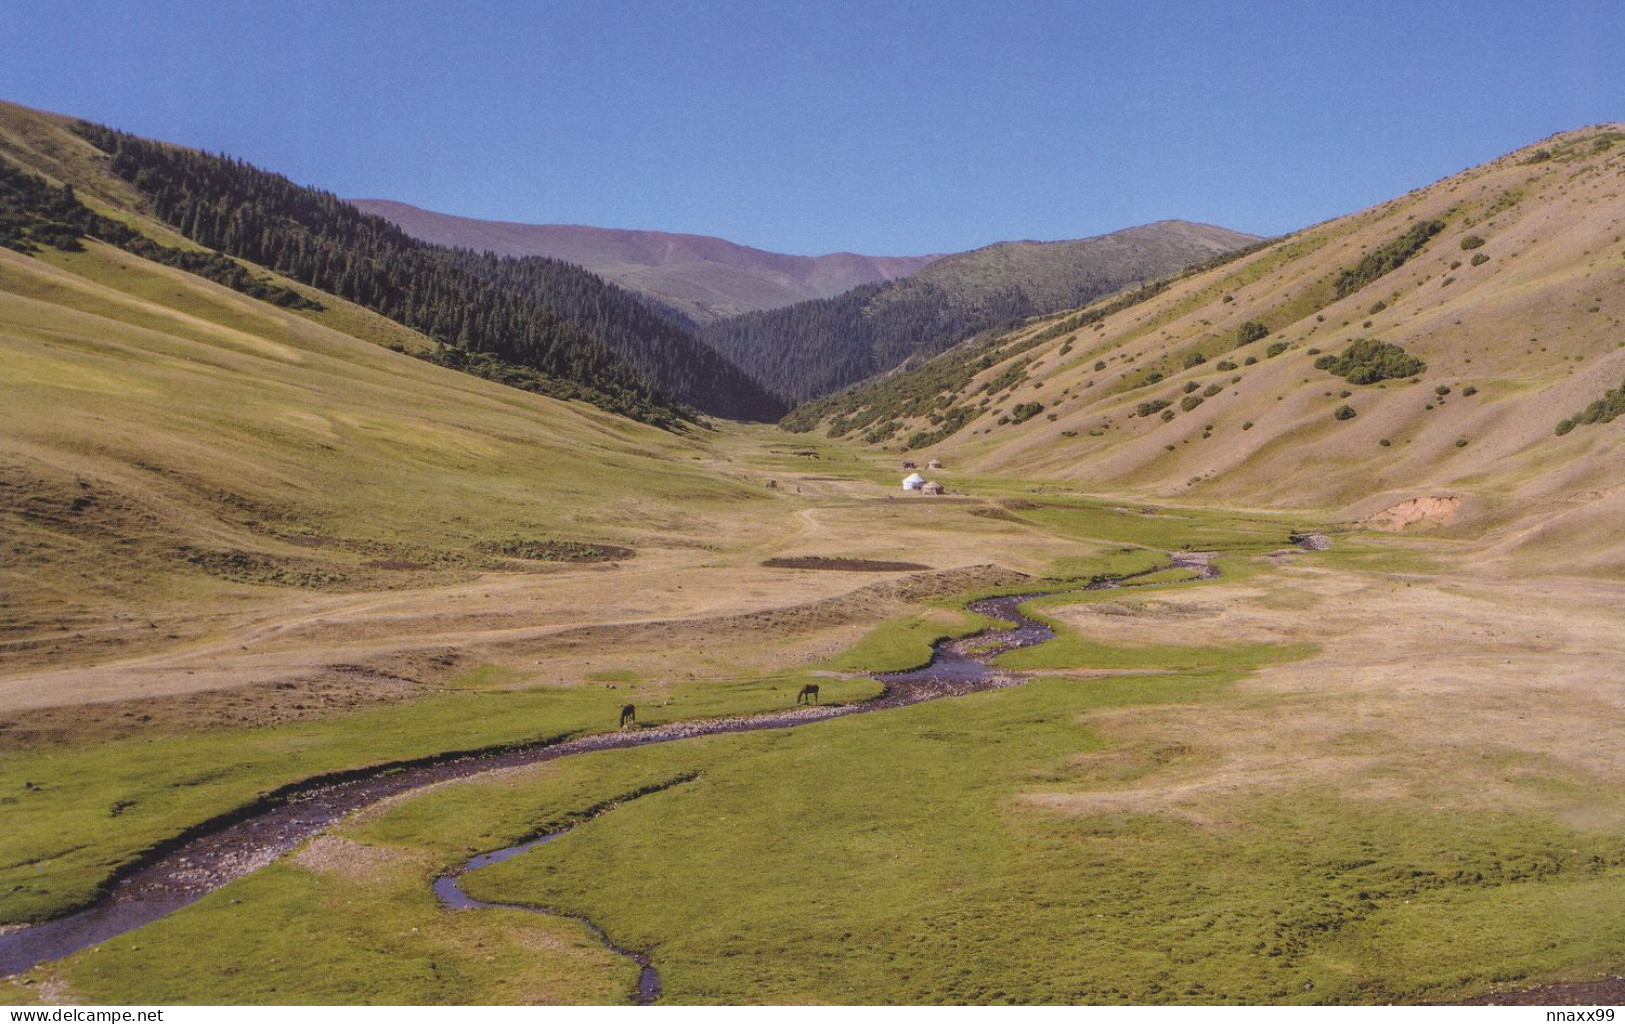 Mongolia - Orkhon Valley Cultural Landscape, UNESCO WHS In SCO Family, China's Postcard - Mongolia